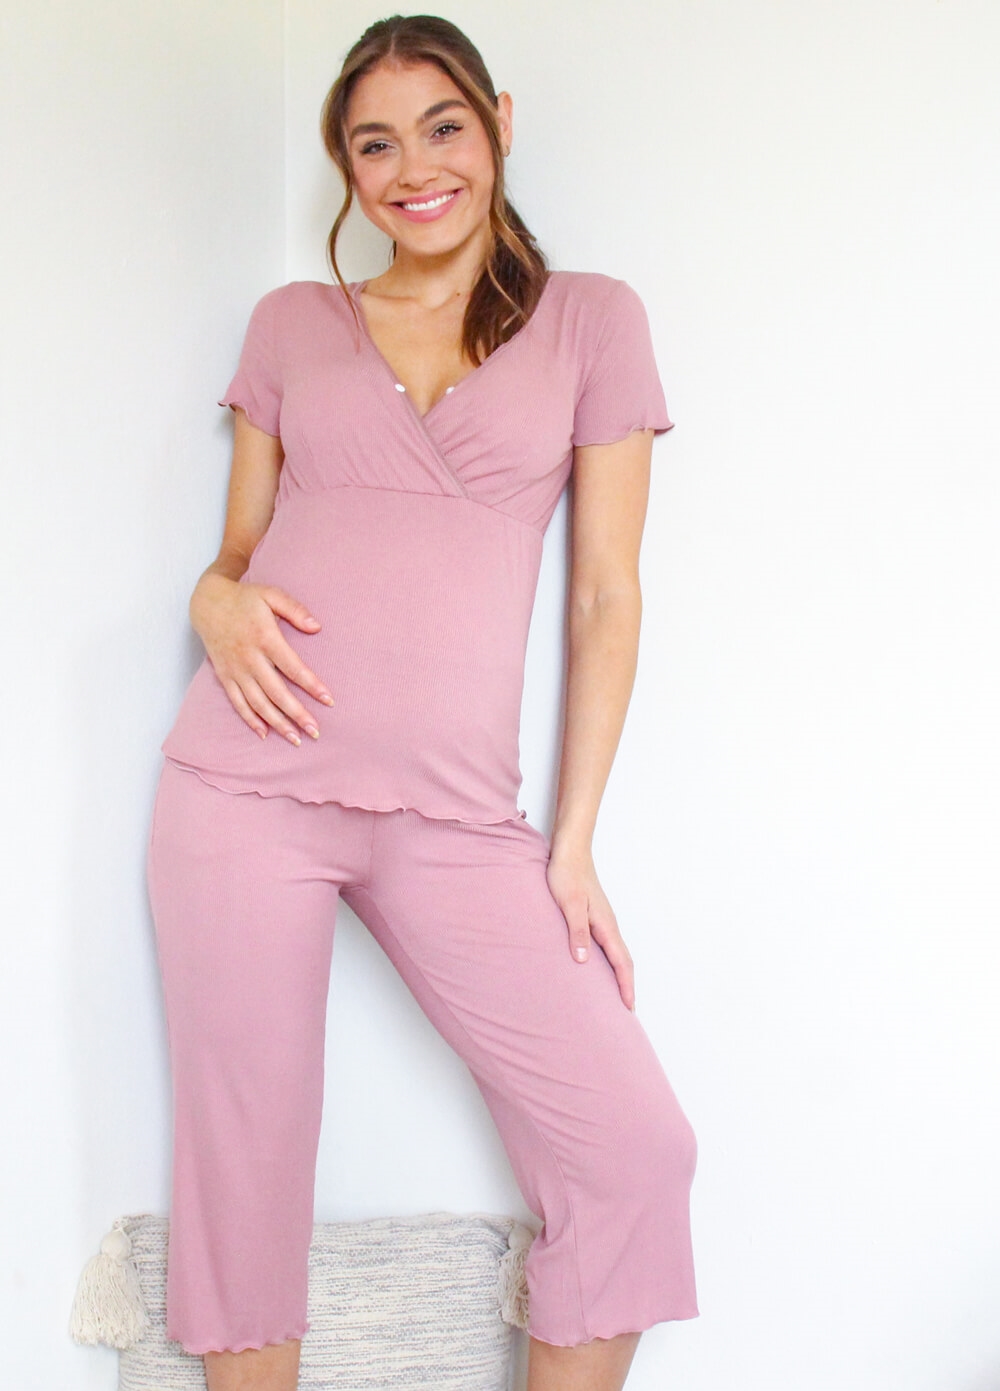 Lait & Co - Oriel New Mama Hospital Lounge Set in Rose | QueenBee